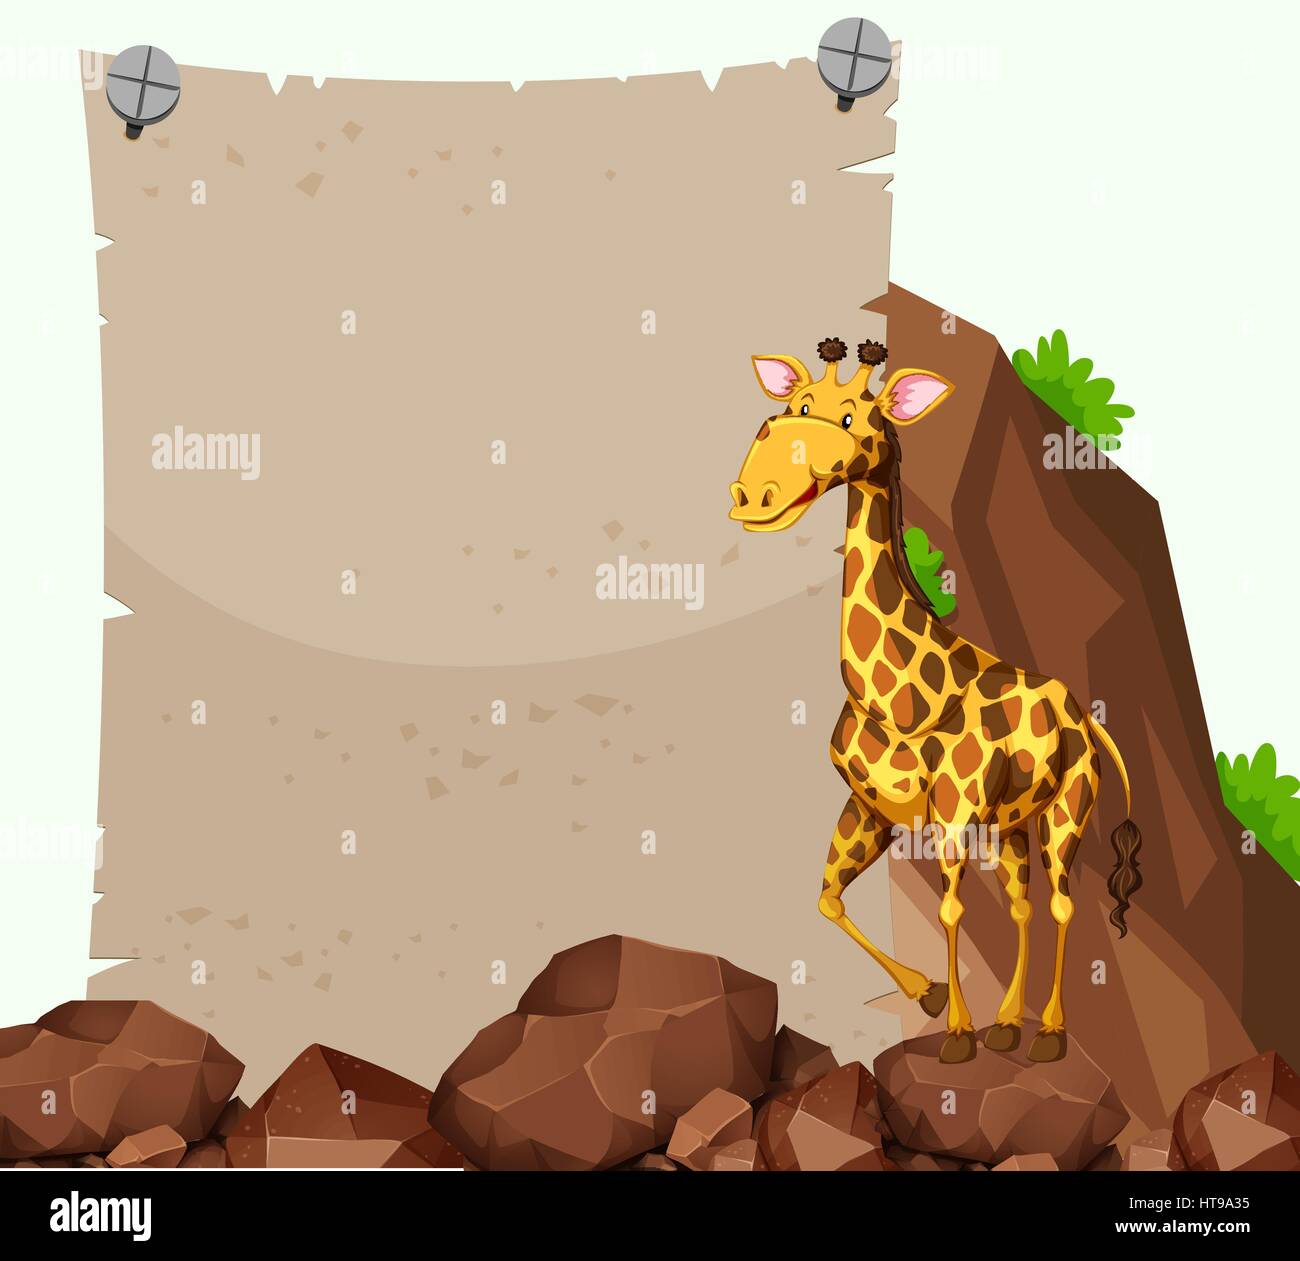 Paper template with giraffe illustration Stock Vector